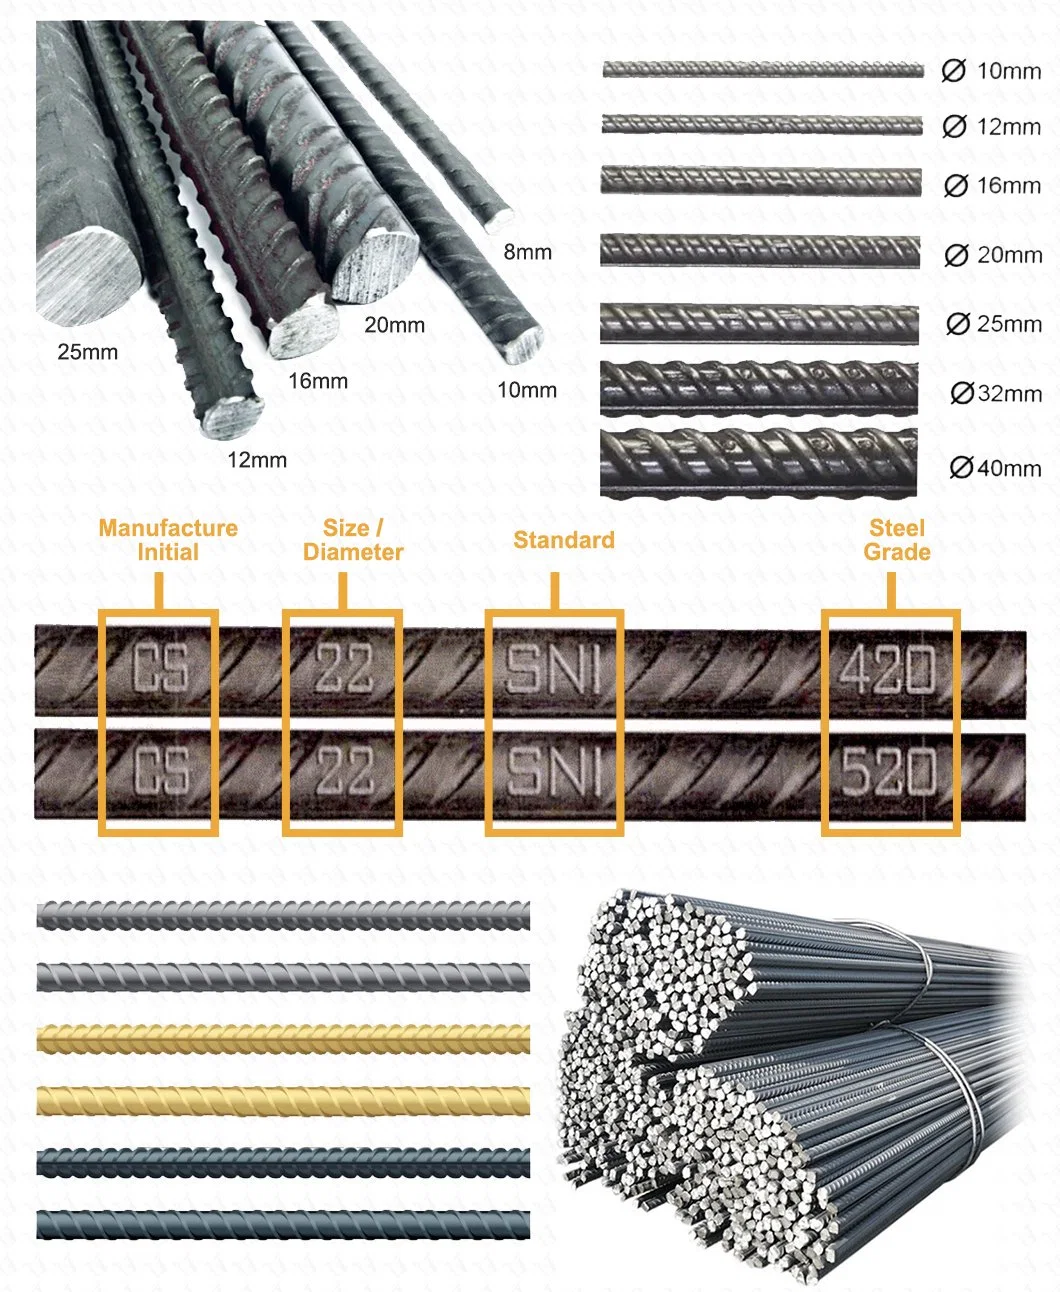 Markdown Sale SAE 1045 4140 4340 8620 8640 Round 6mm 8mm 10mm 12mm 14mm 16mm 20mm Steel Rebar for Building Construction